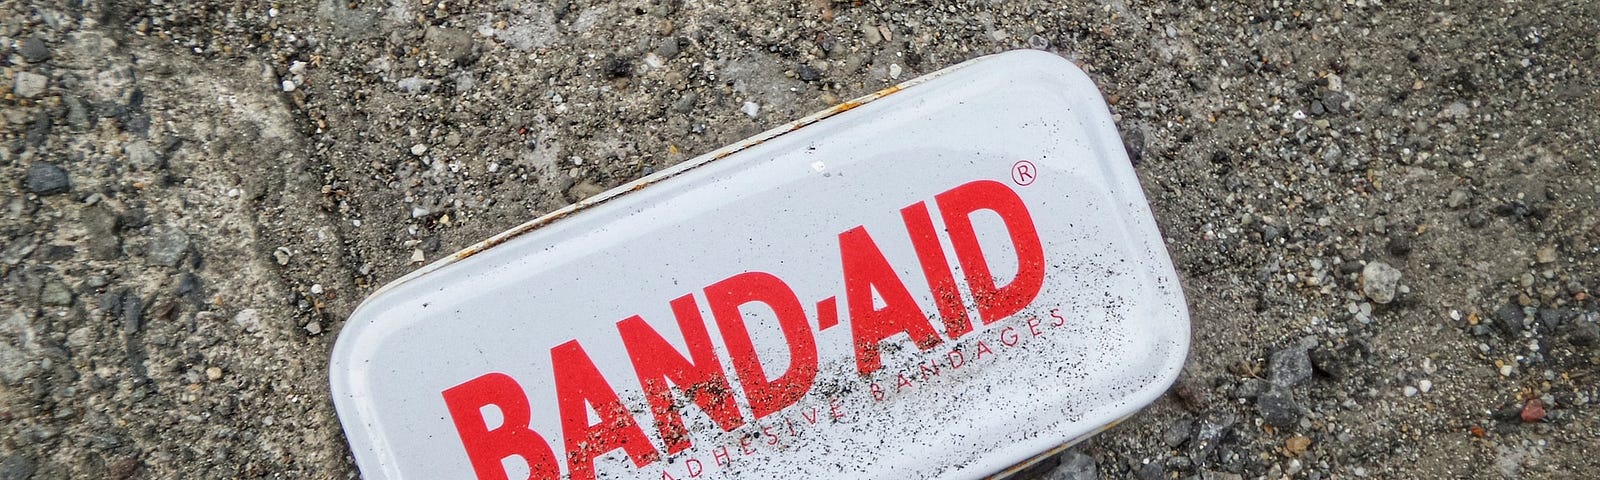 A white metal first aid kit that says BAND-AID in red letters sitting on a patch of dirt